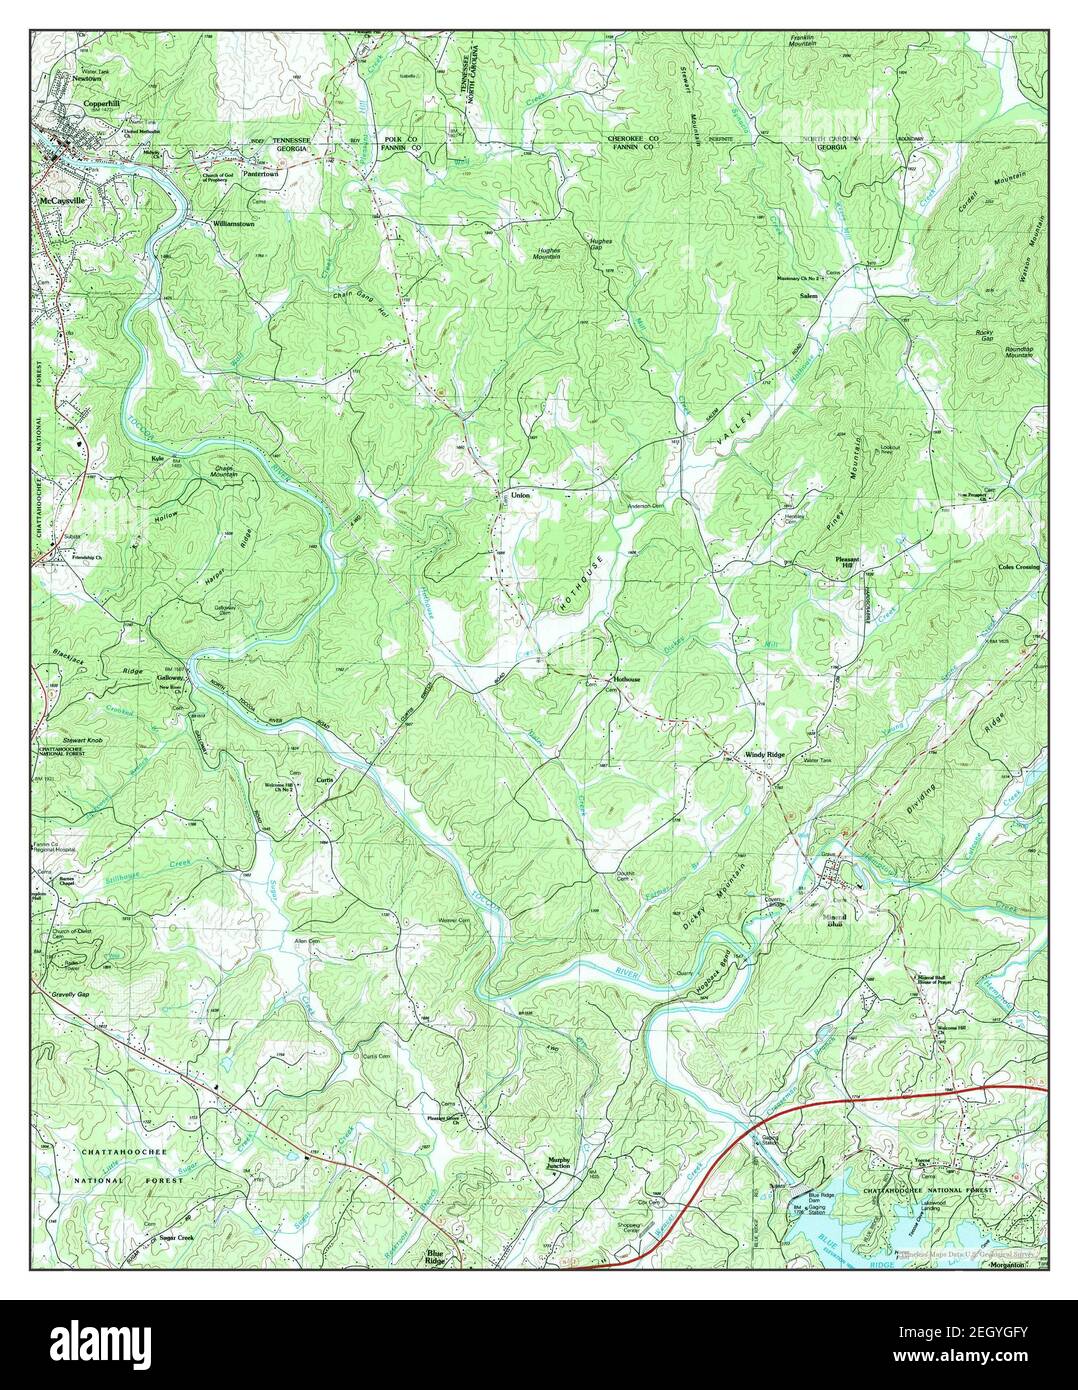 Mineral Bluff, Georgia, map 1988, 1:24000, United States of America by Timeless Maps, data U.S. Geological Survey Foto Stock